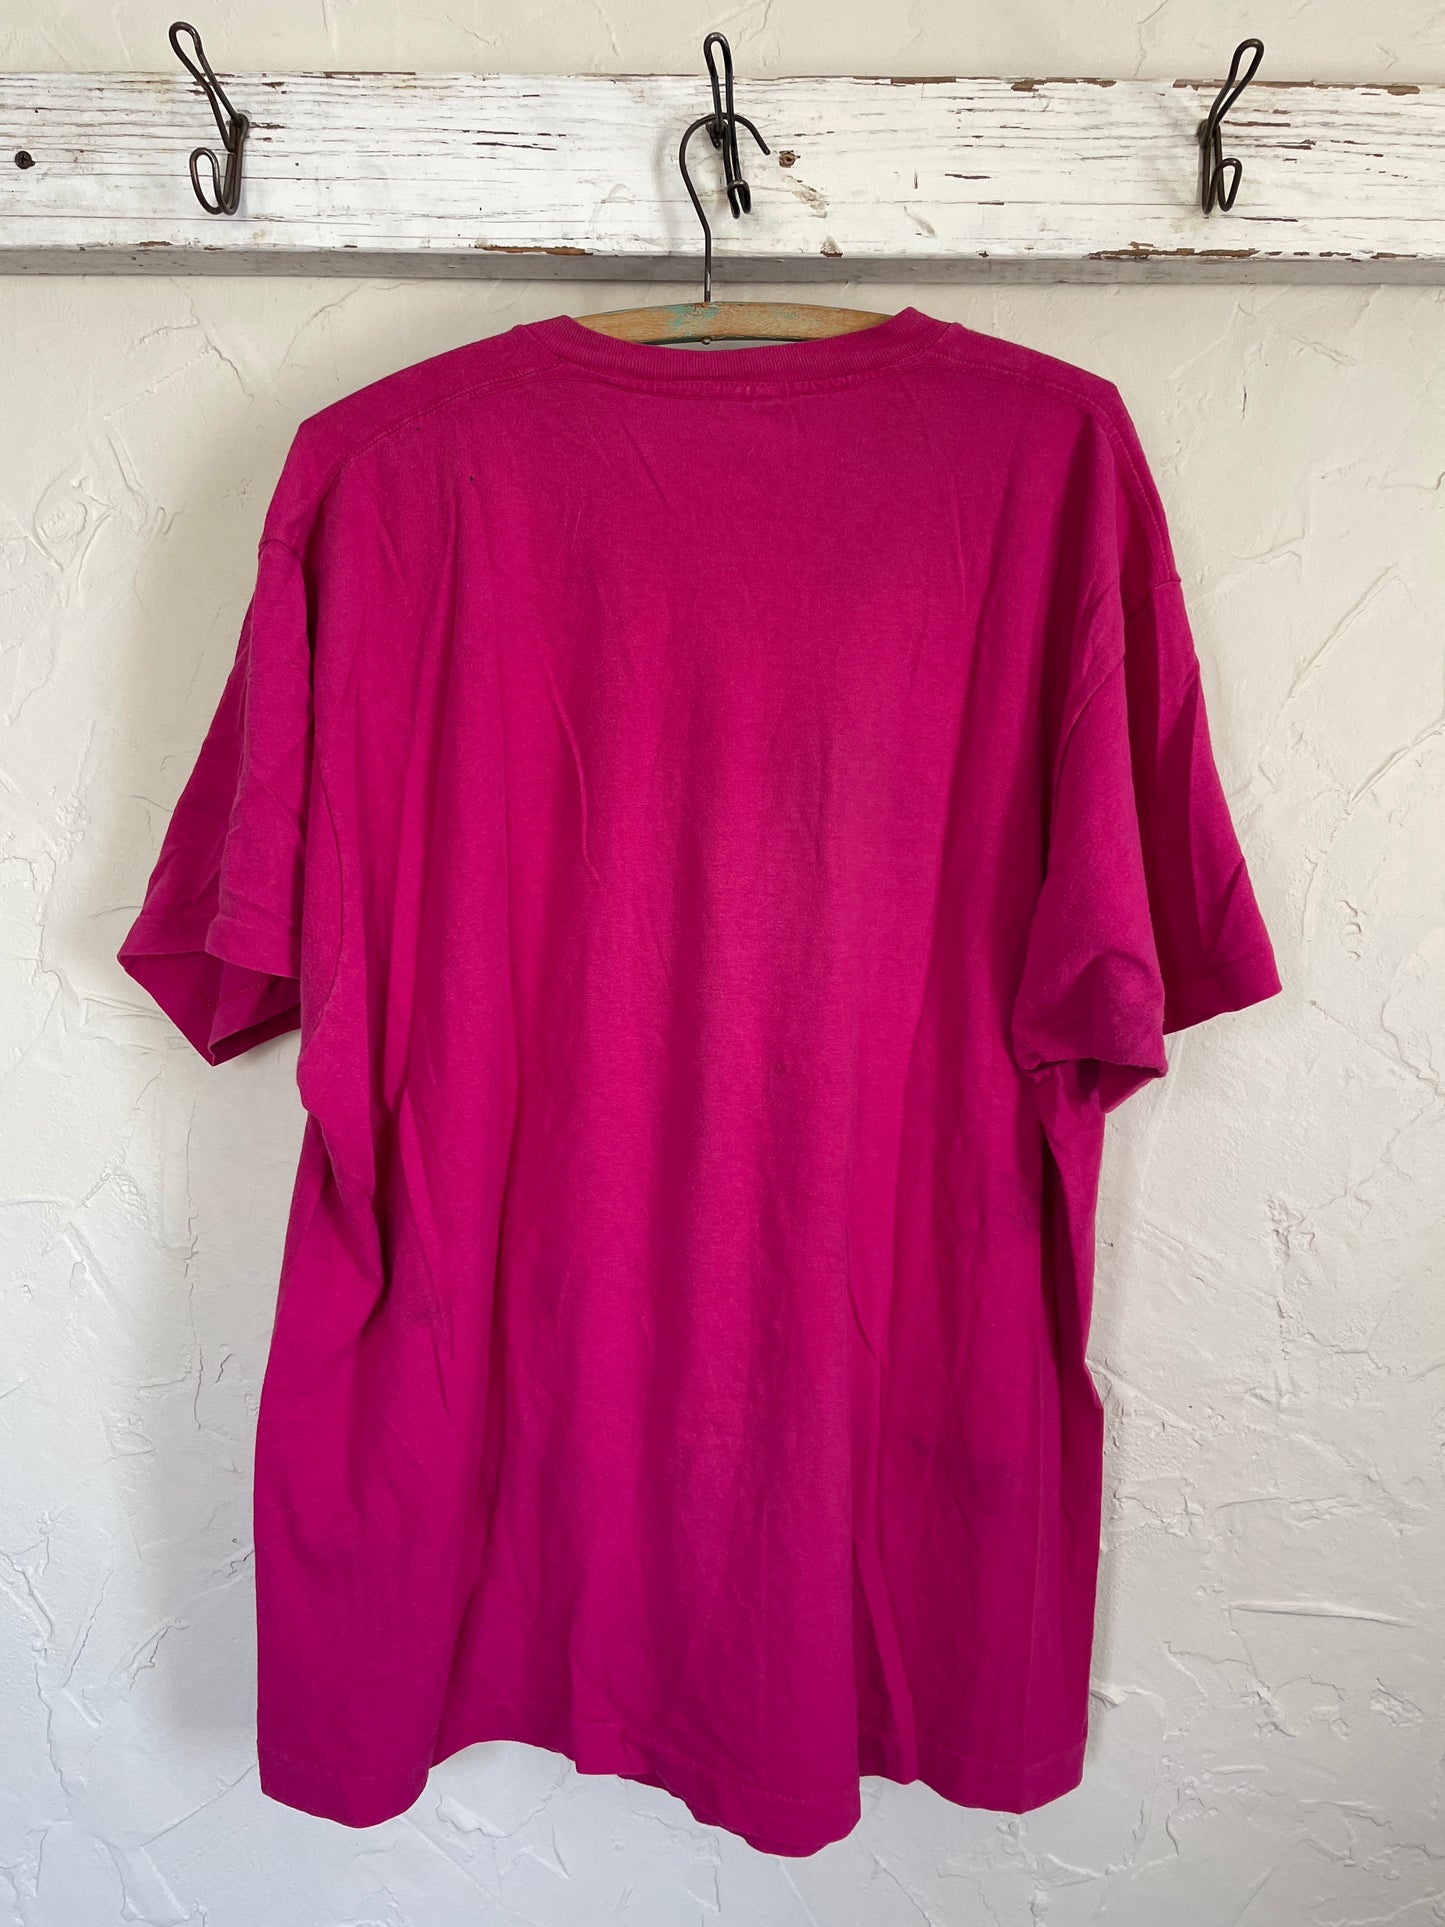 90s Blank Bright Pink Tee